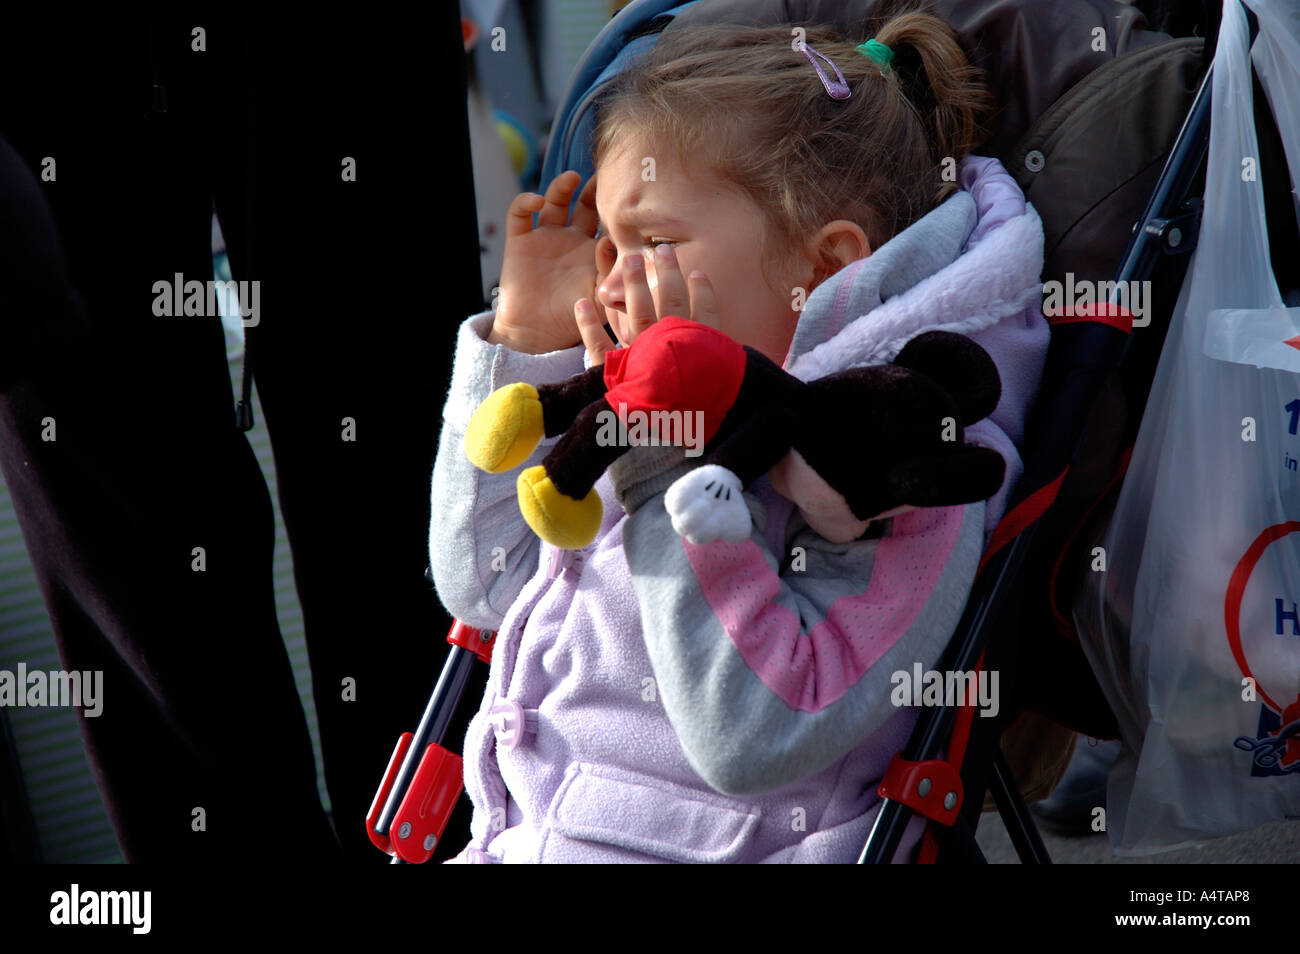 Child in tears in a pushchair. Stock Photo